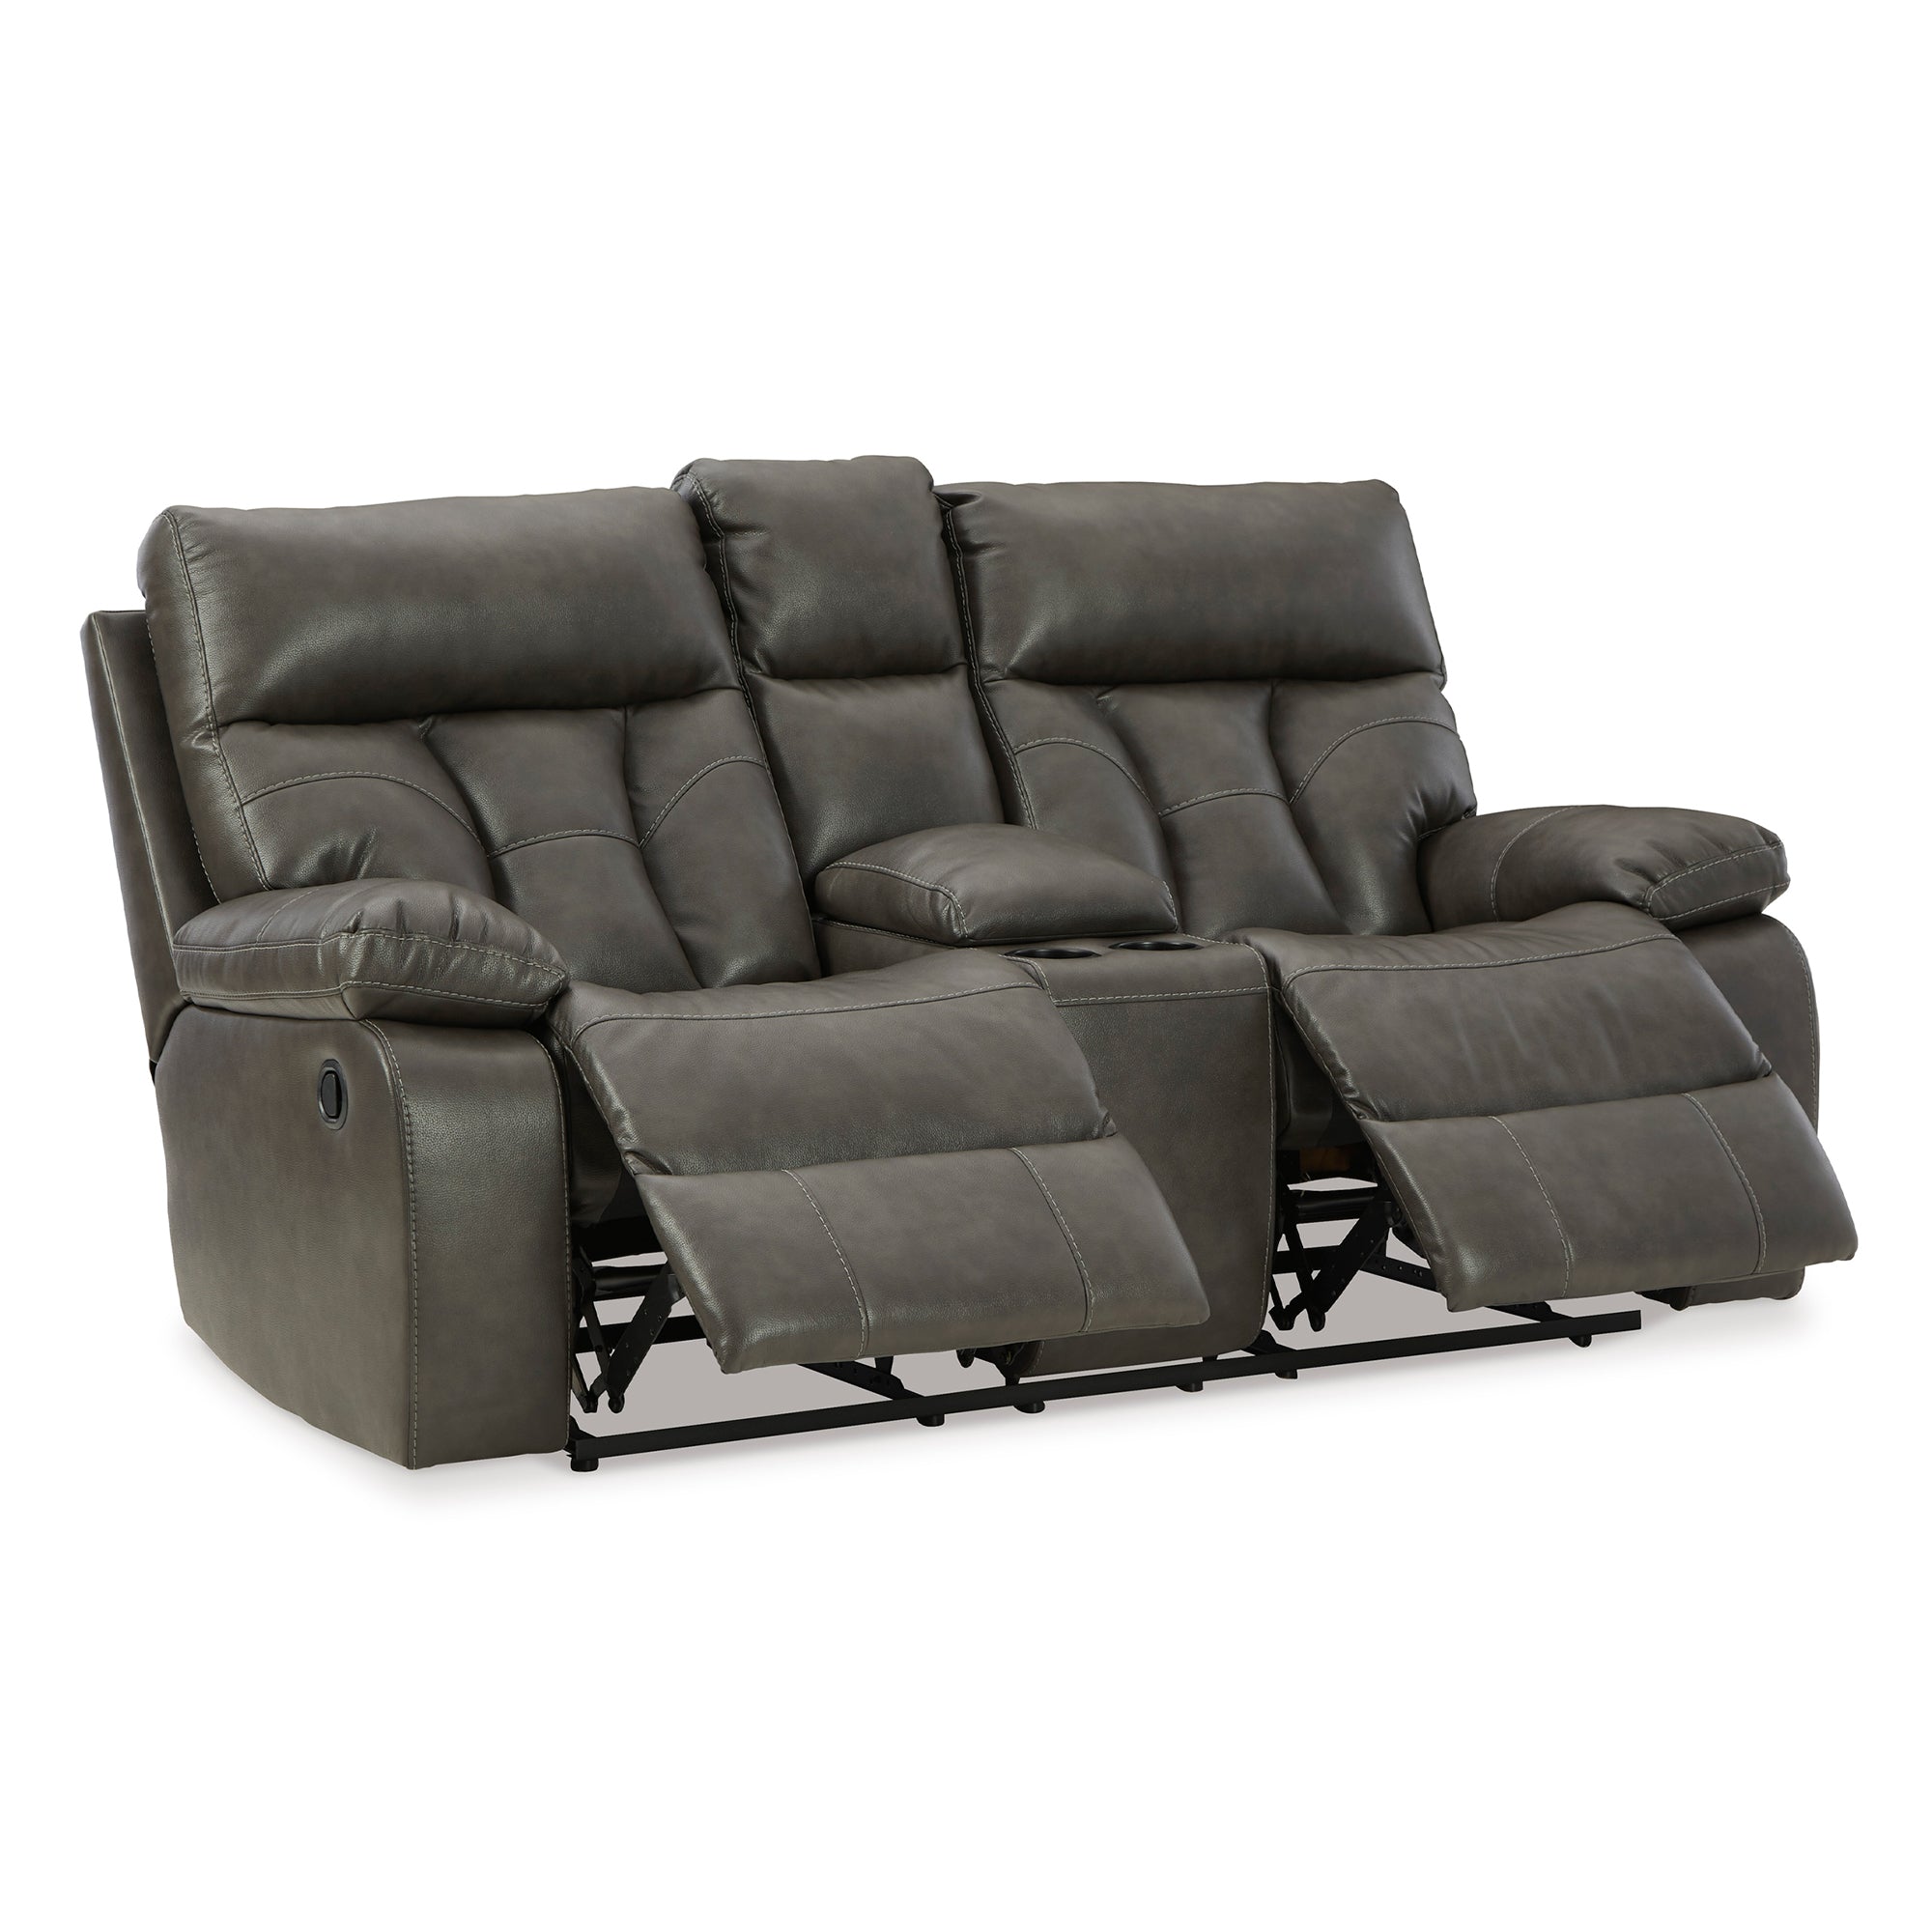 Willamen Reclining Loveseat with Console